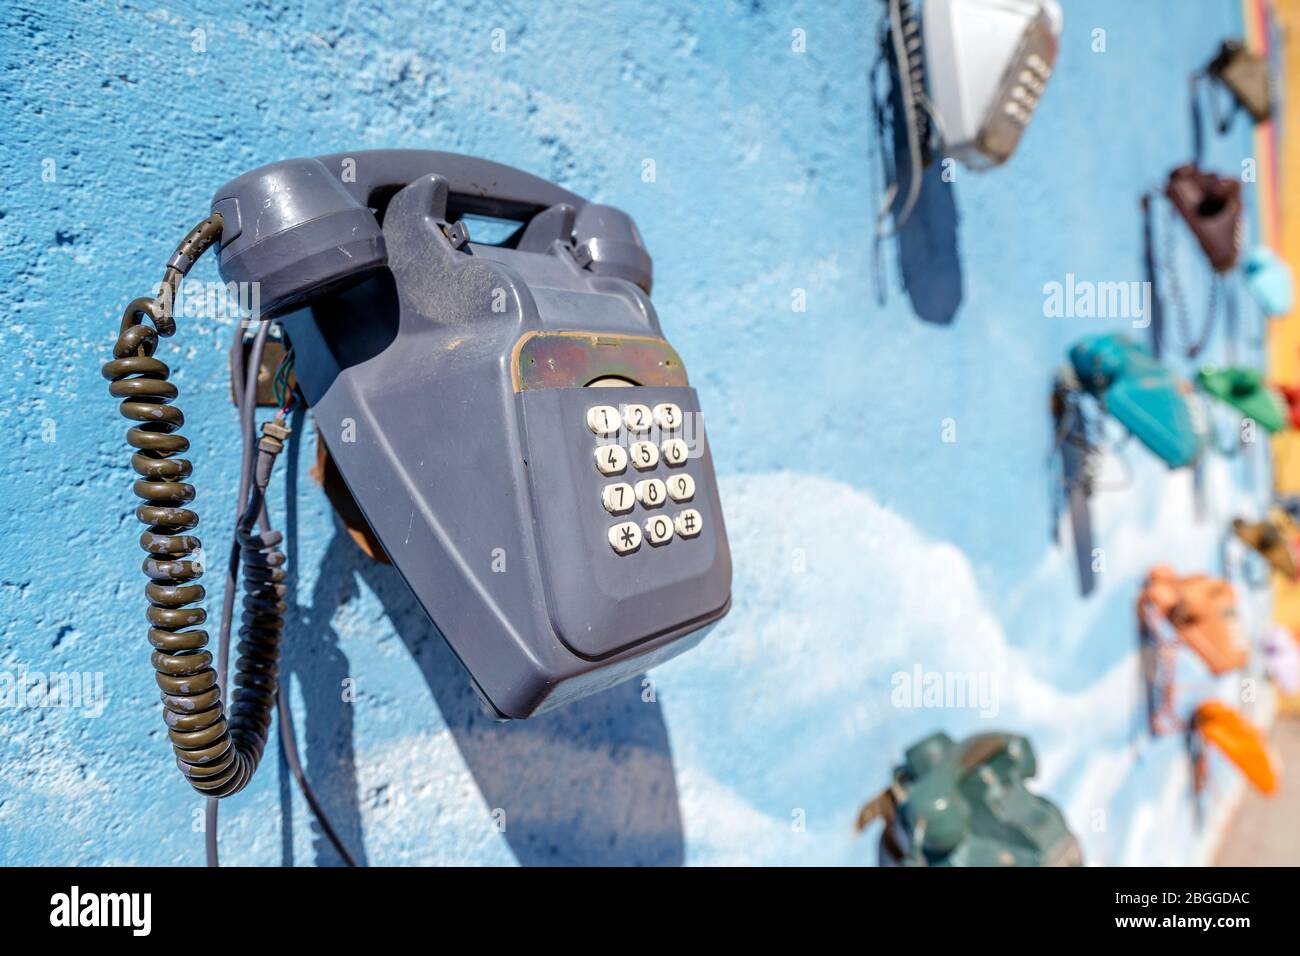 A lot of vintage, colorful telephones hanging on the blue wall in Morocco Stock Photo